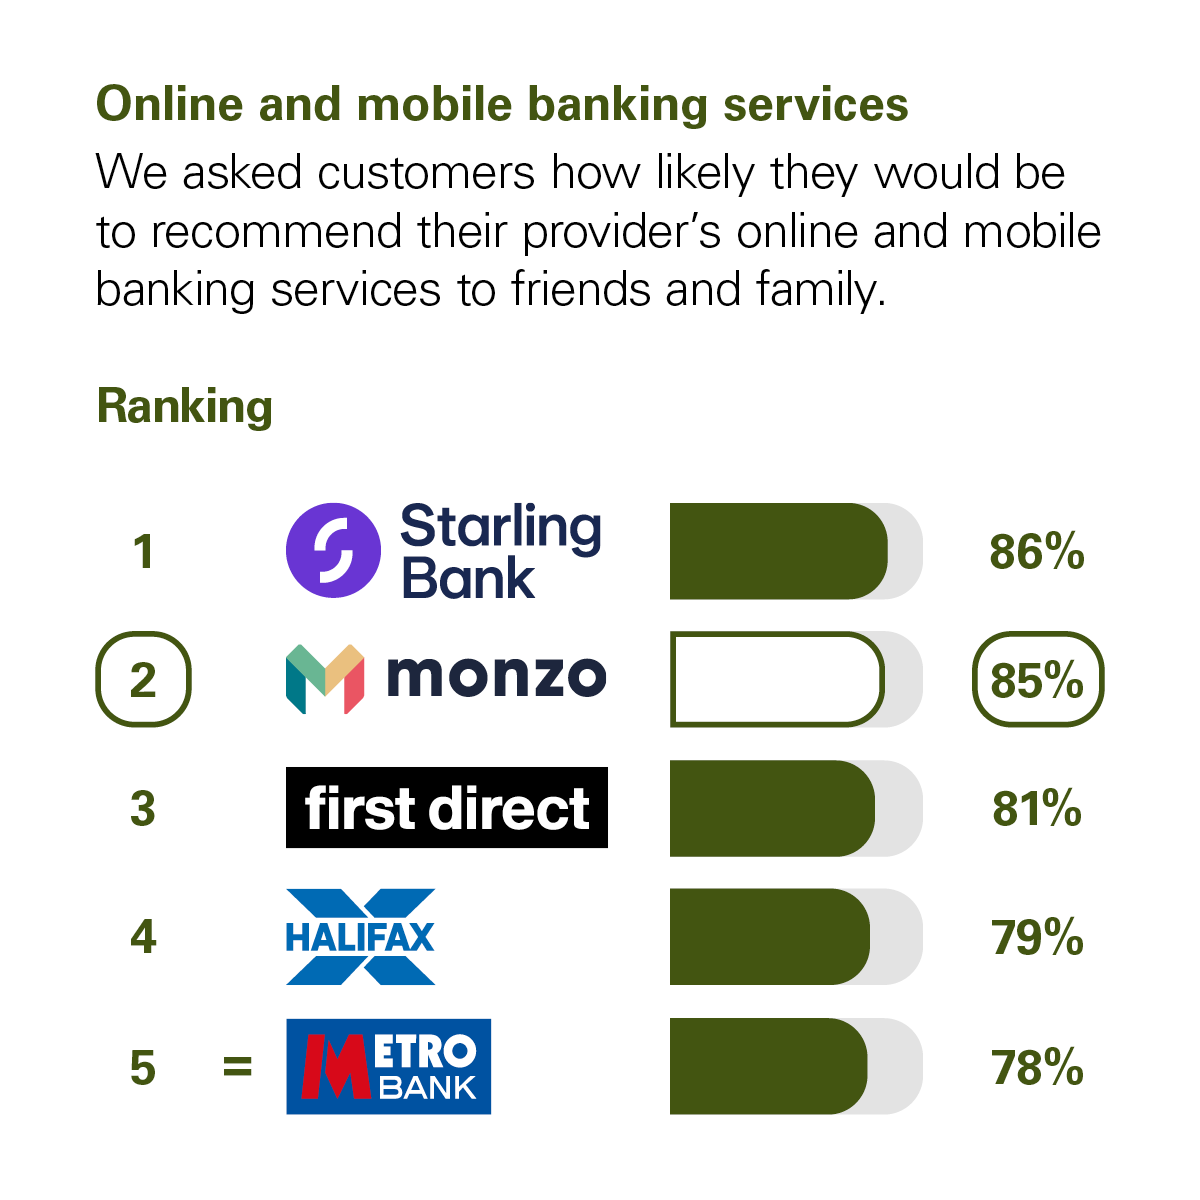 Graph showing the results of the CMA scoring of UK banks in the Online and Mobile Banking Services category. The CMA asked customers how likely they would be to recommend their provider's online and mobile banking services to friends and family. The rankings with percentage scores are: 1st Starling Bank with 86%. 2nd Monzo with 85%. 3rd First Direct 81%. 4th Halifax with 79%. 5th Metro Bank with 78%.